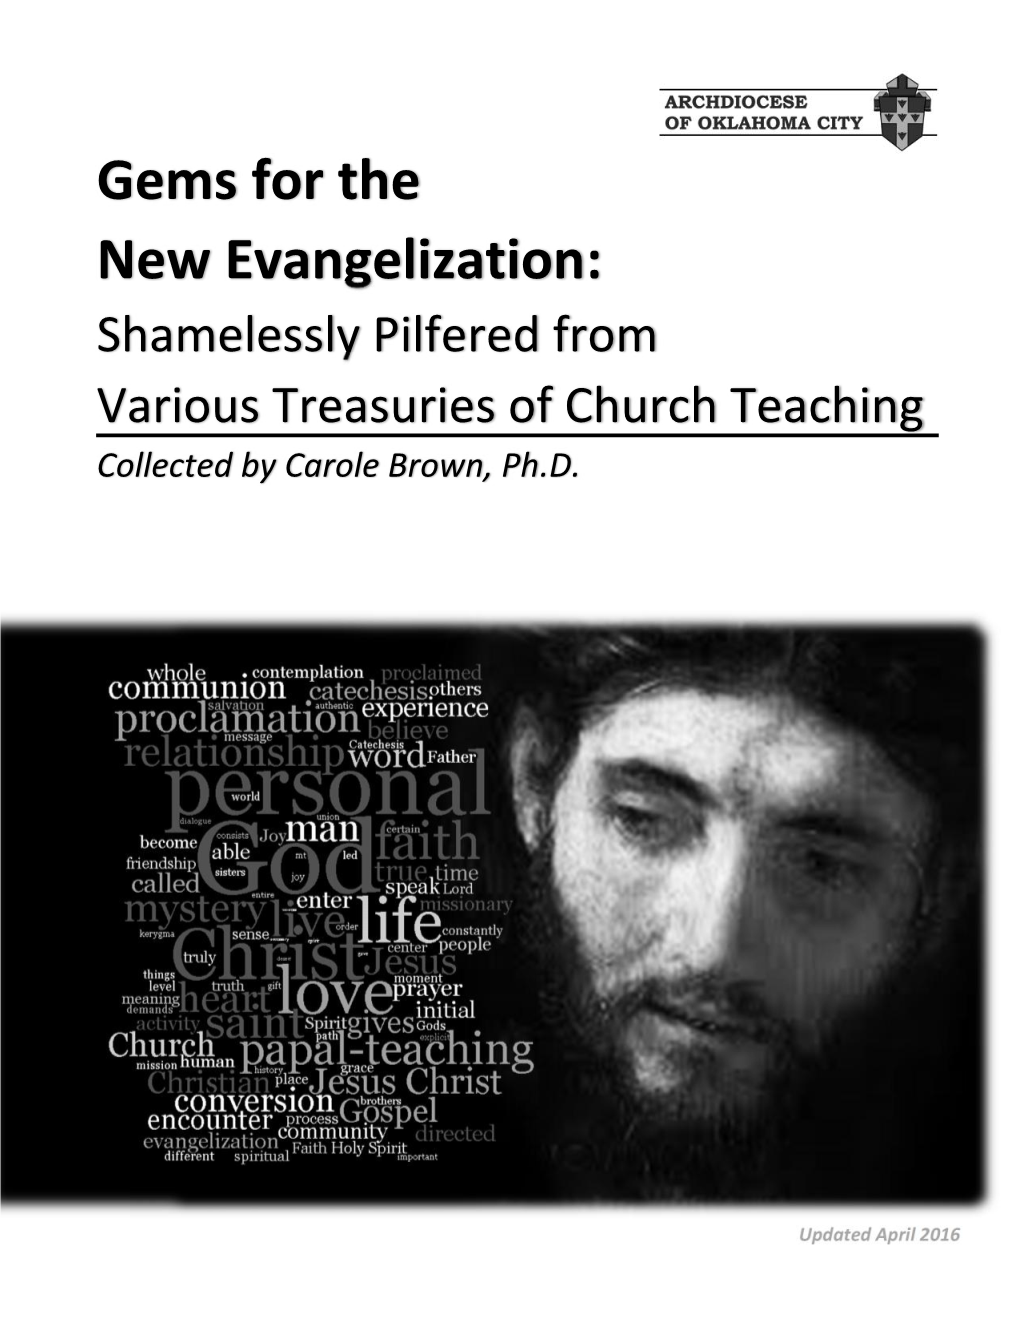 Gems for the New Evangelization: Shamelessly Pilfered from Various Treasuries of Church Teaching Collected by Carole Brown, Ph.D